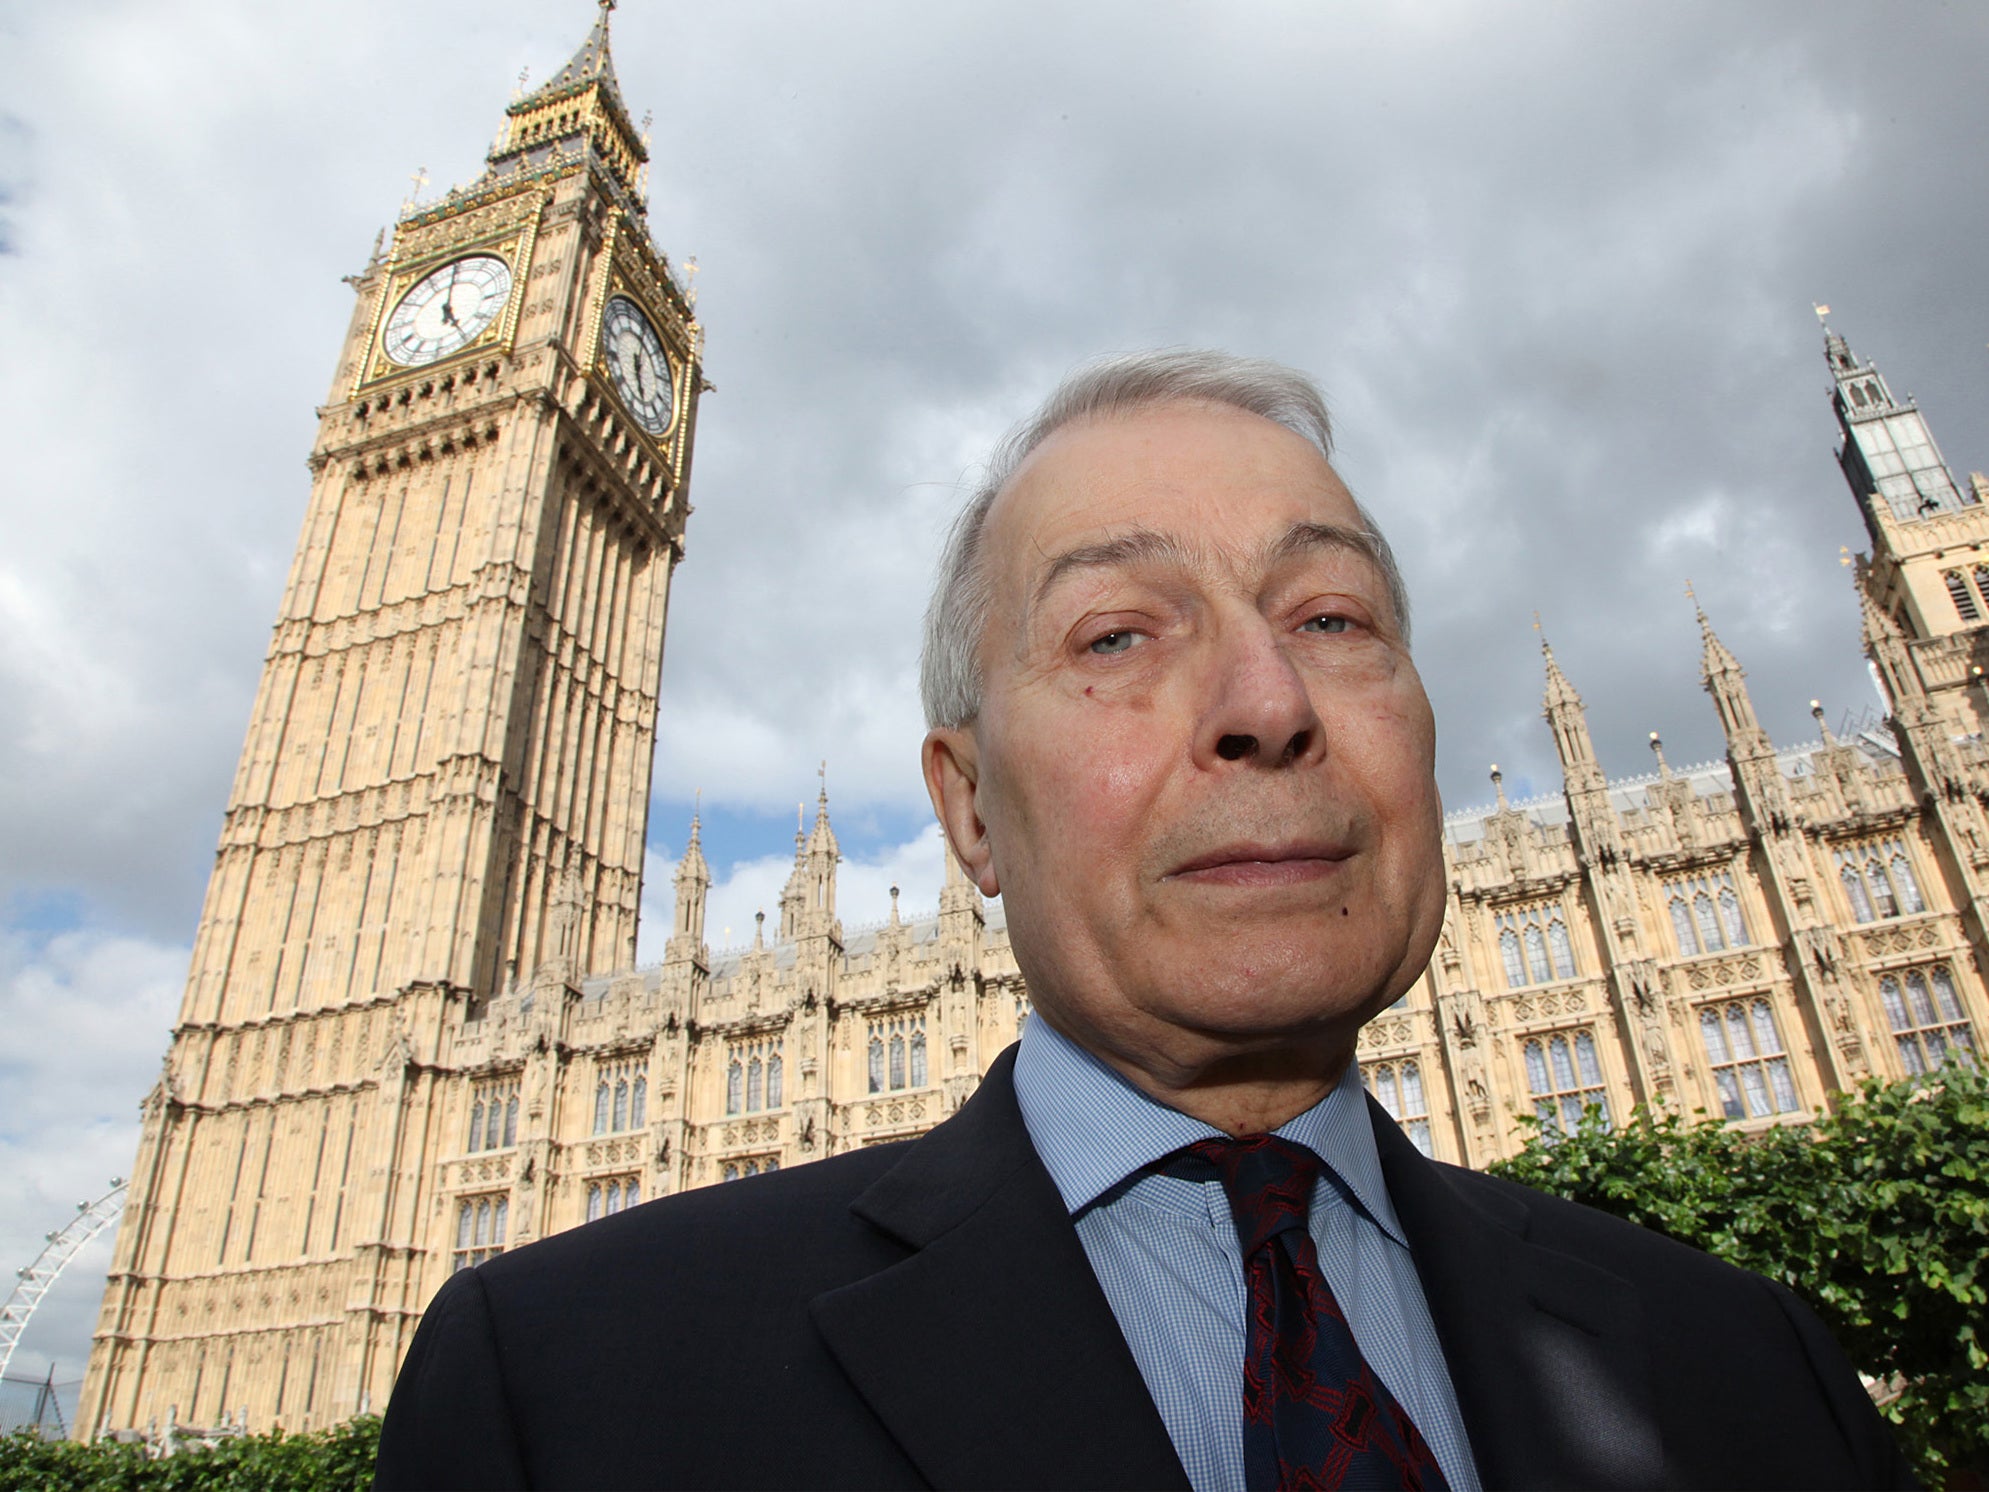 Frank Field resigned the Labour whip today over the antisemitism scandal